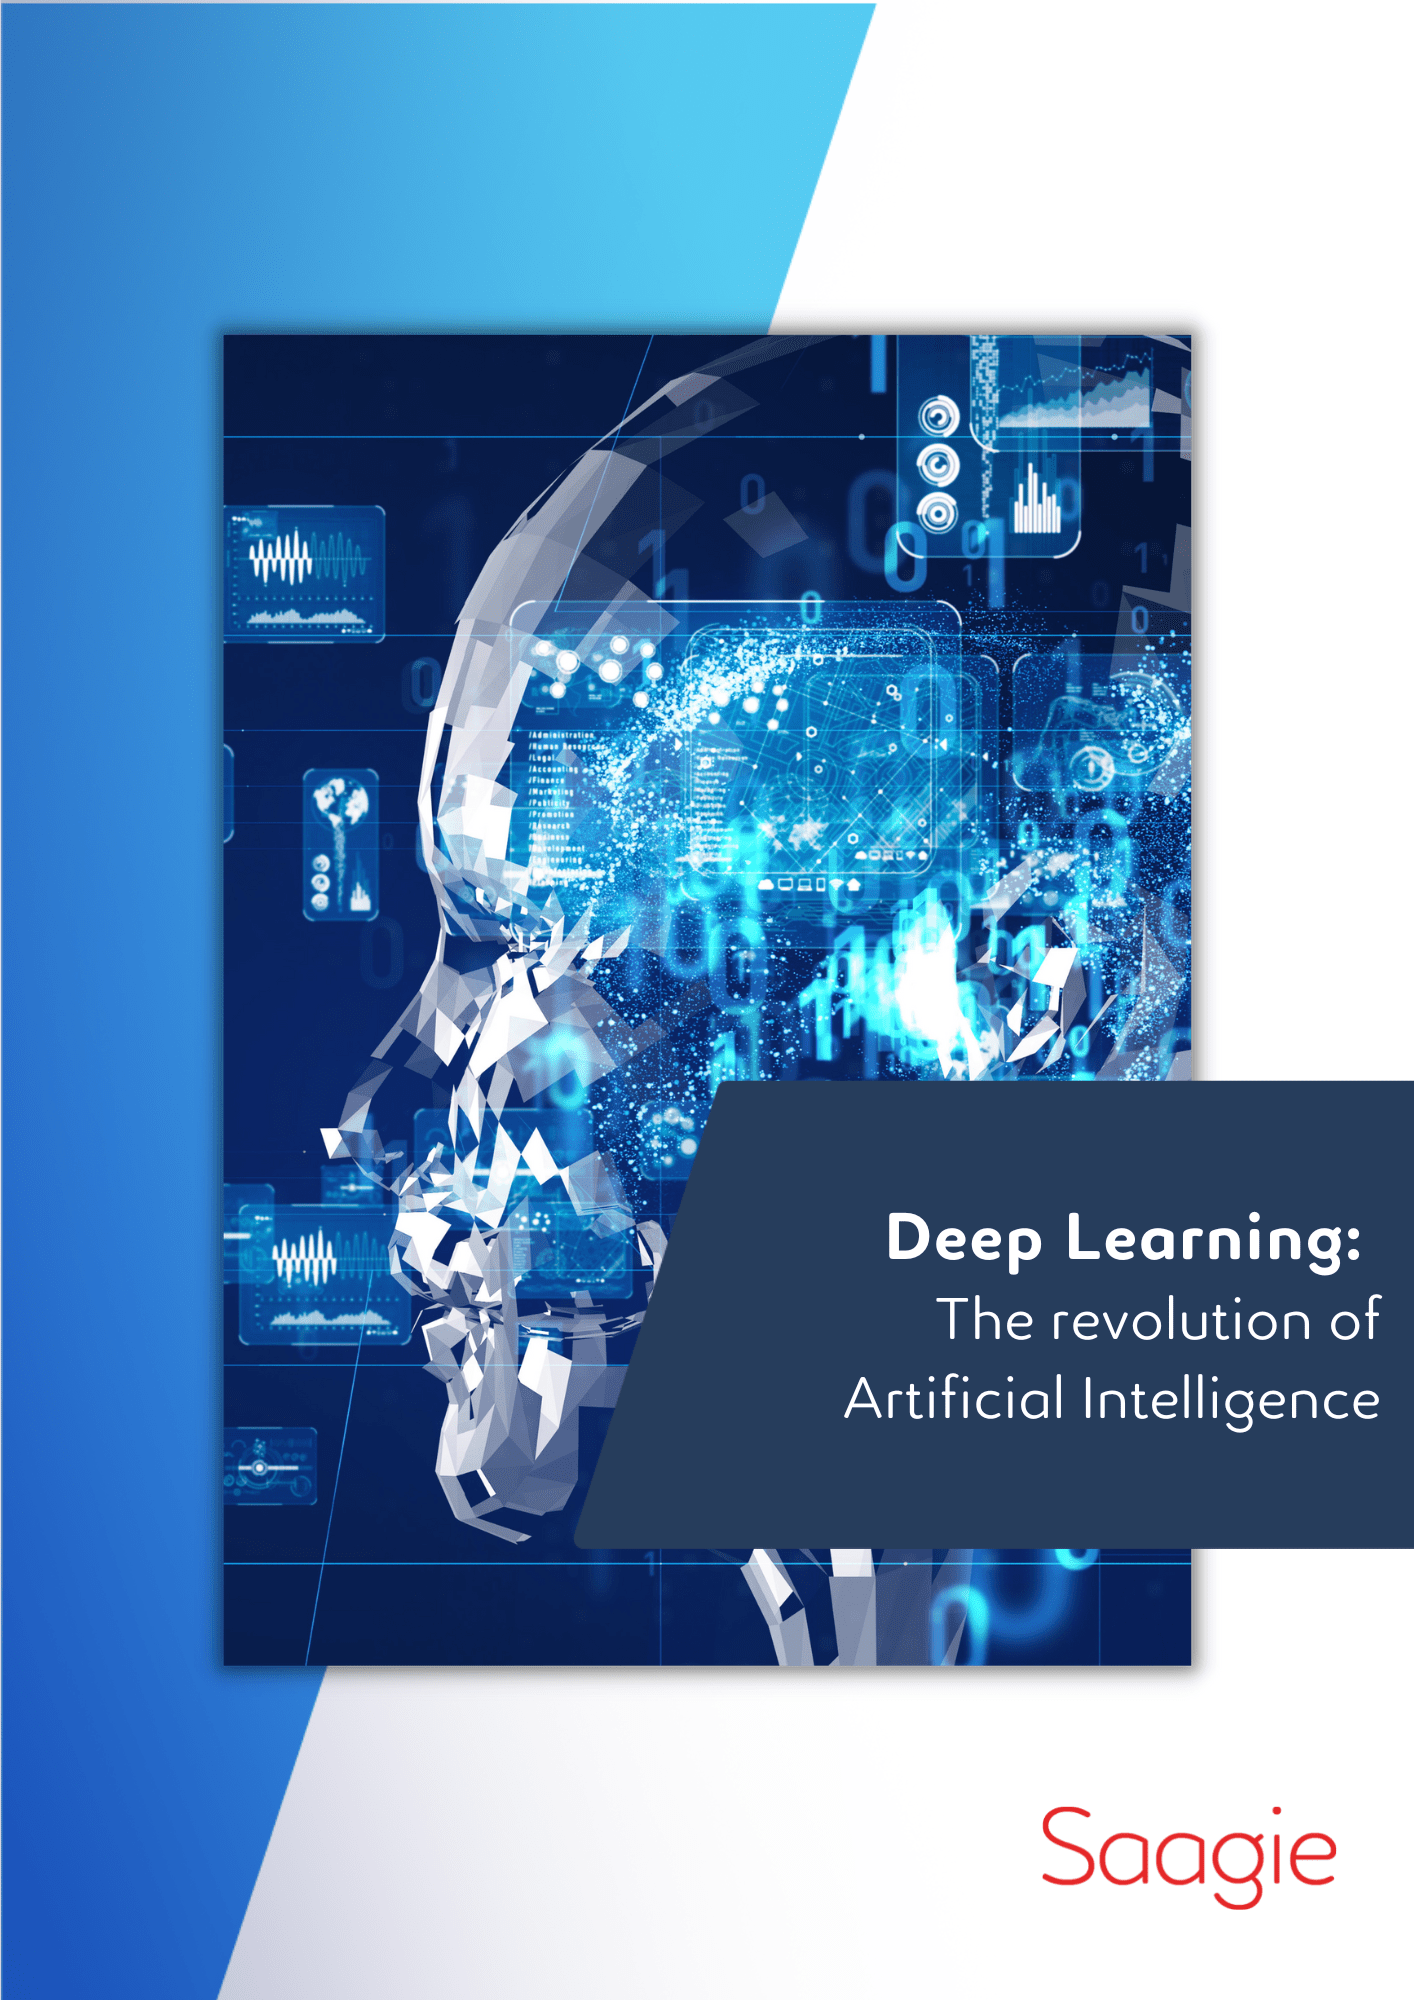 Deep learning : the revolution of Artificial Intelligence